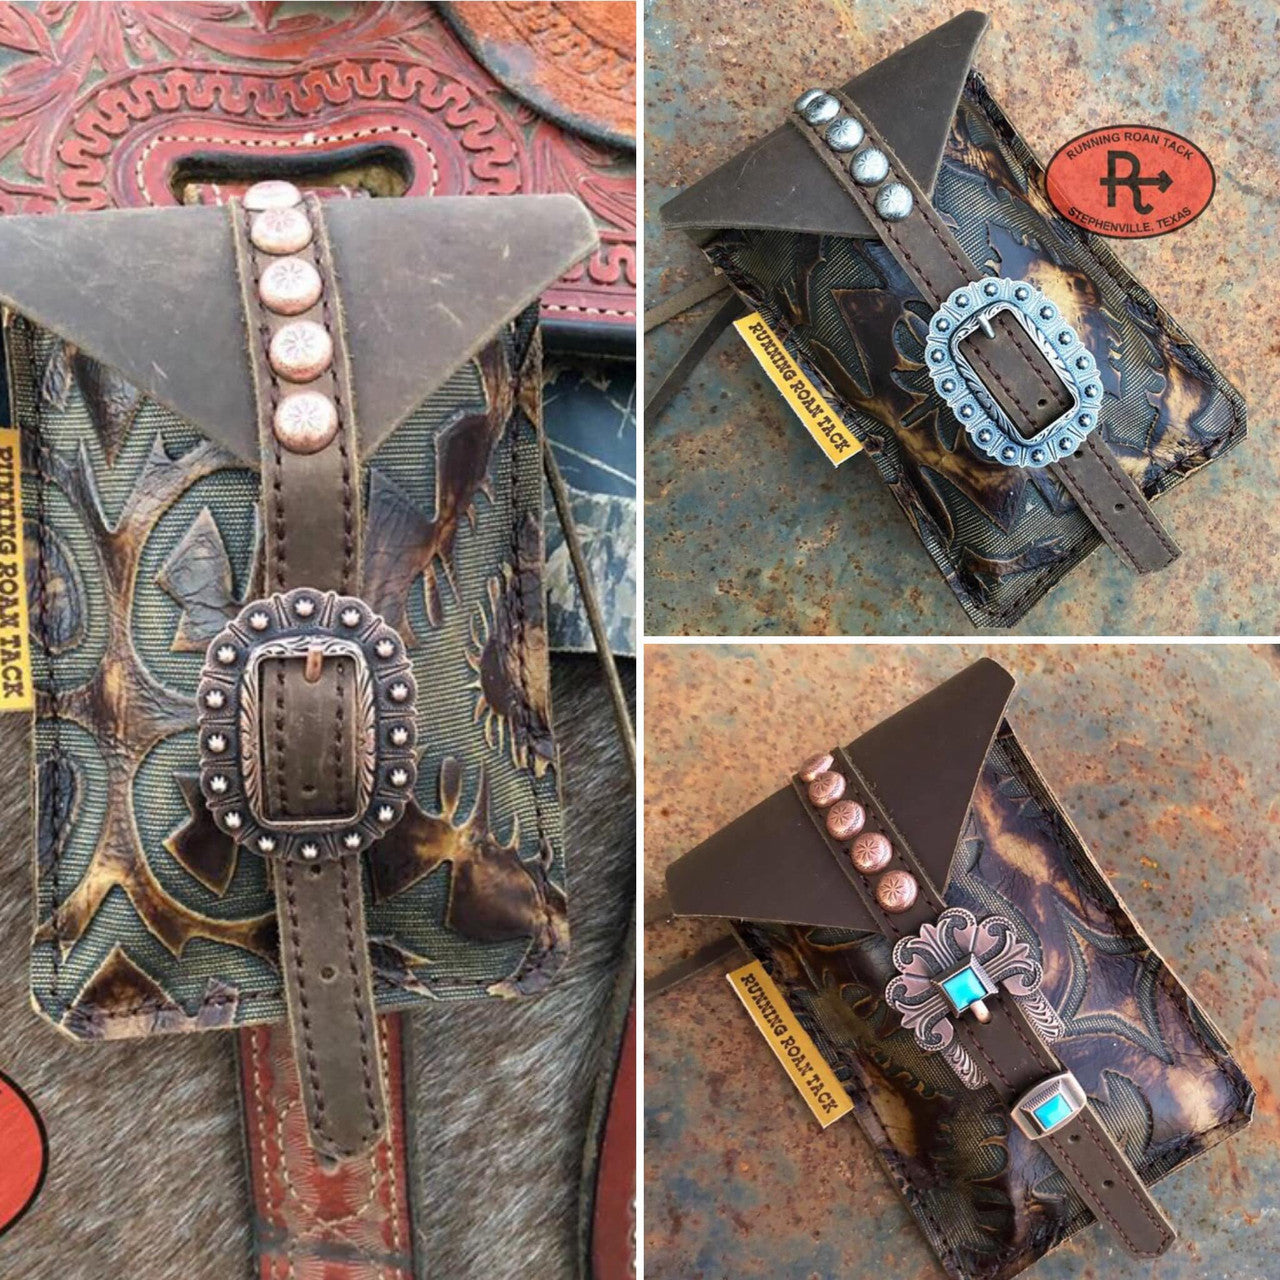 Sepia Boot Top Mini Saddle Bag with Your Choice of Buckle and Fringe for Phone, Keys, Roping Powder, etc